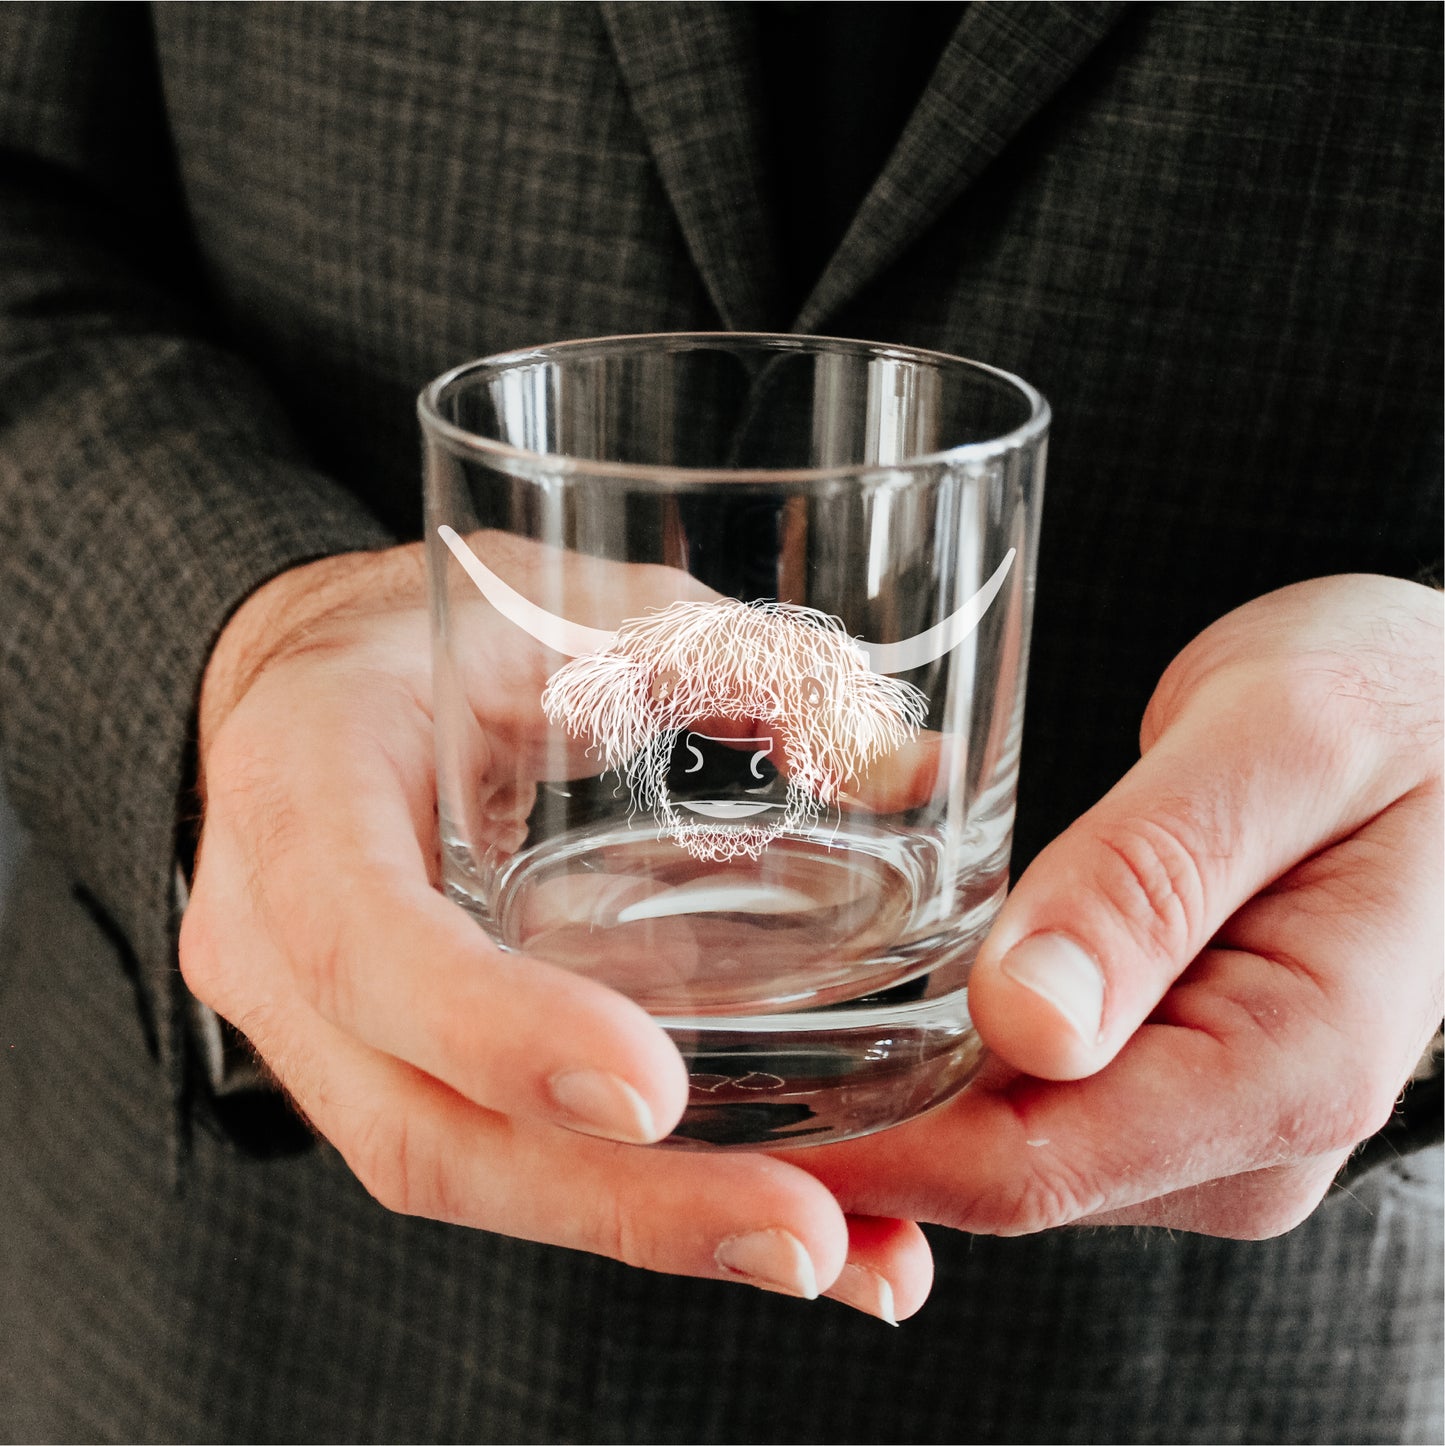 Man holding an engraved whisky glass with a design of a highland cow